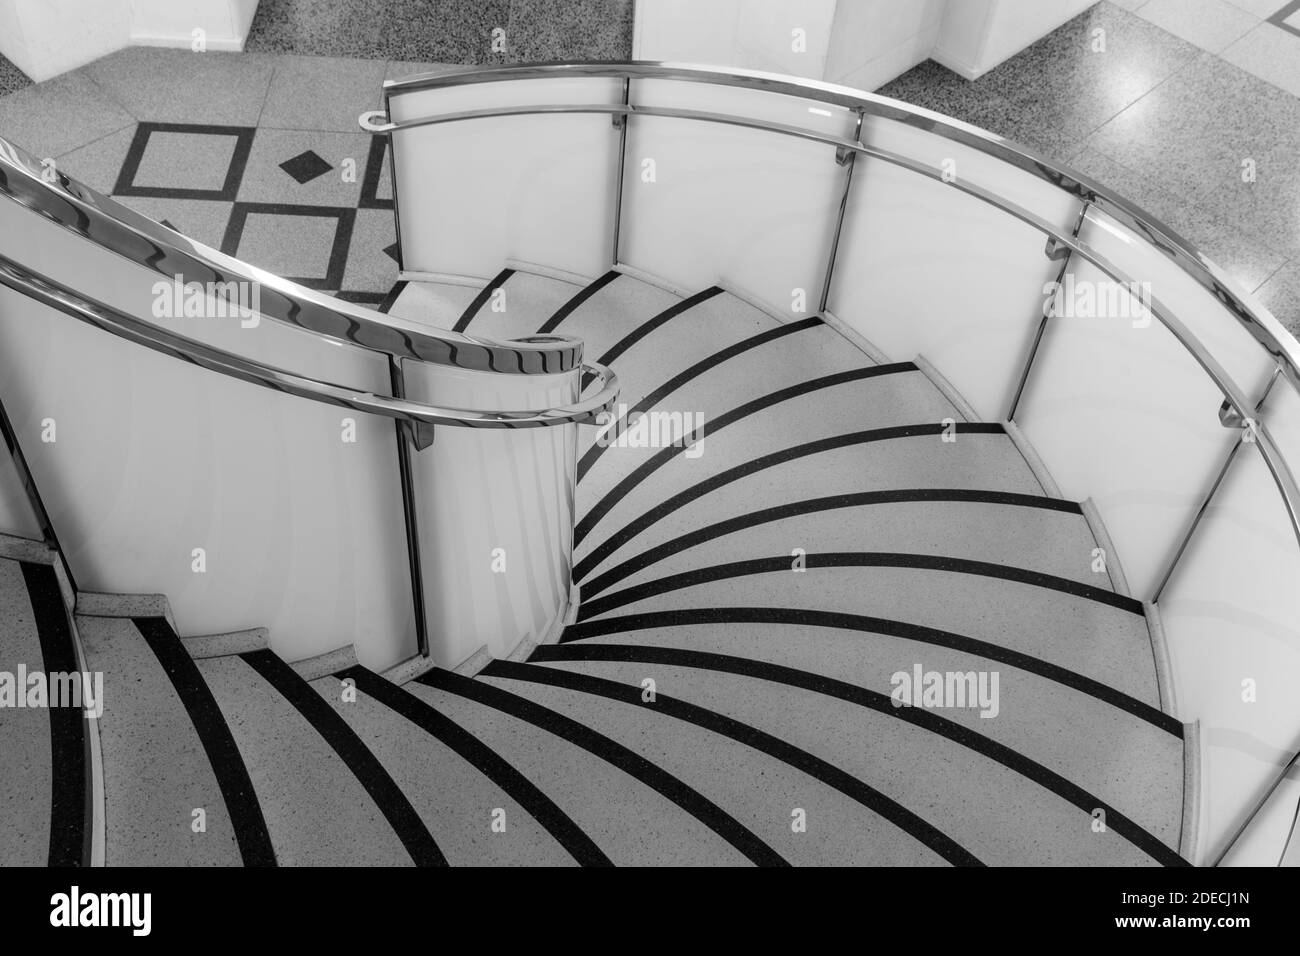 Spiral staircase, detail with terazzo floor on stairs at Tate Britain, monochrome, London, England, UK Stock Photo